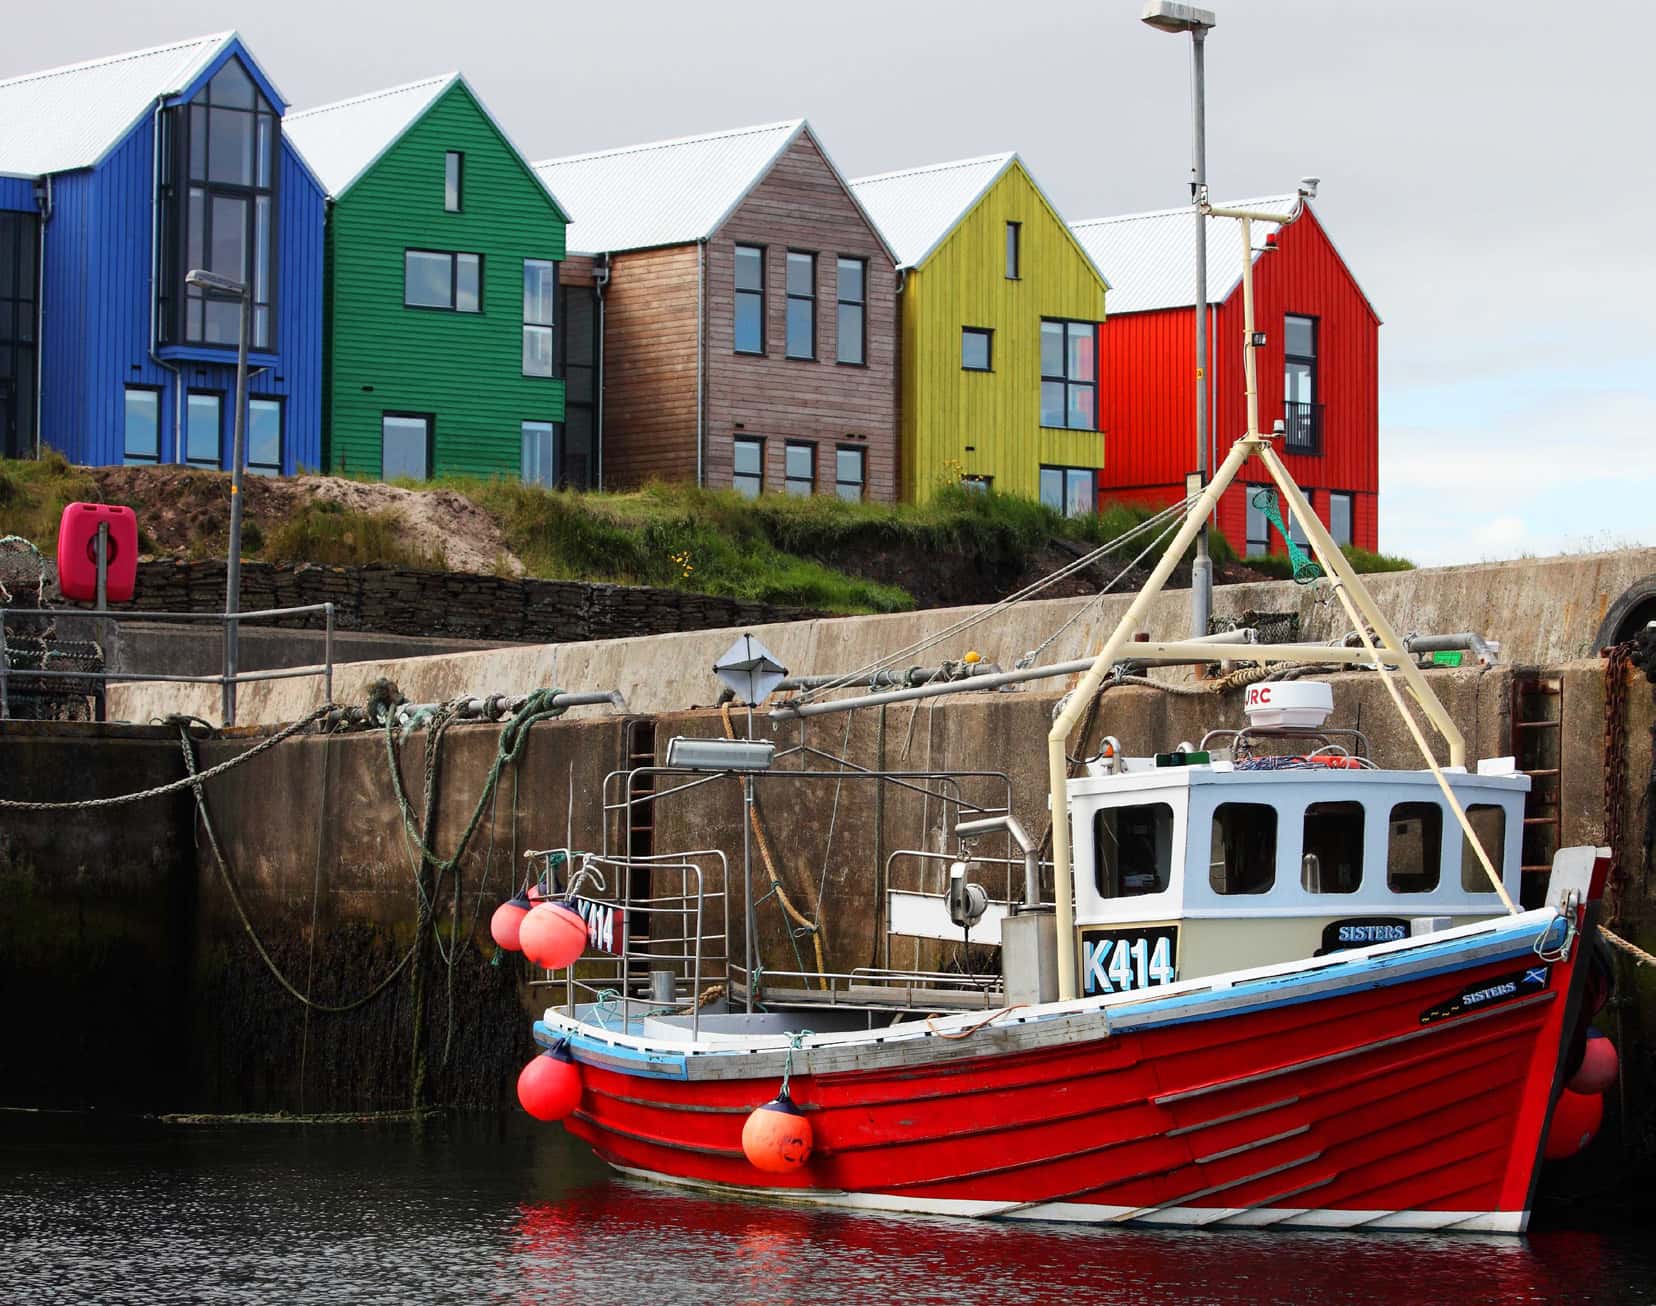 A row of brightly coloured buildings above a stone dock with a bright red boat sitting in the water.